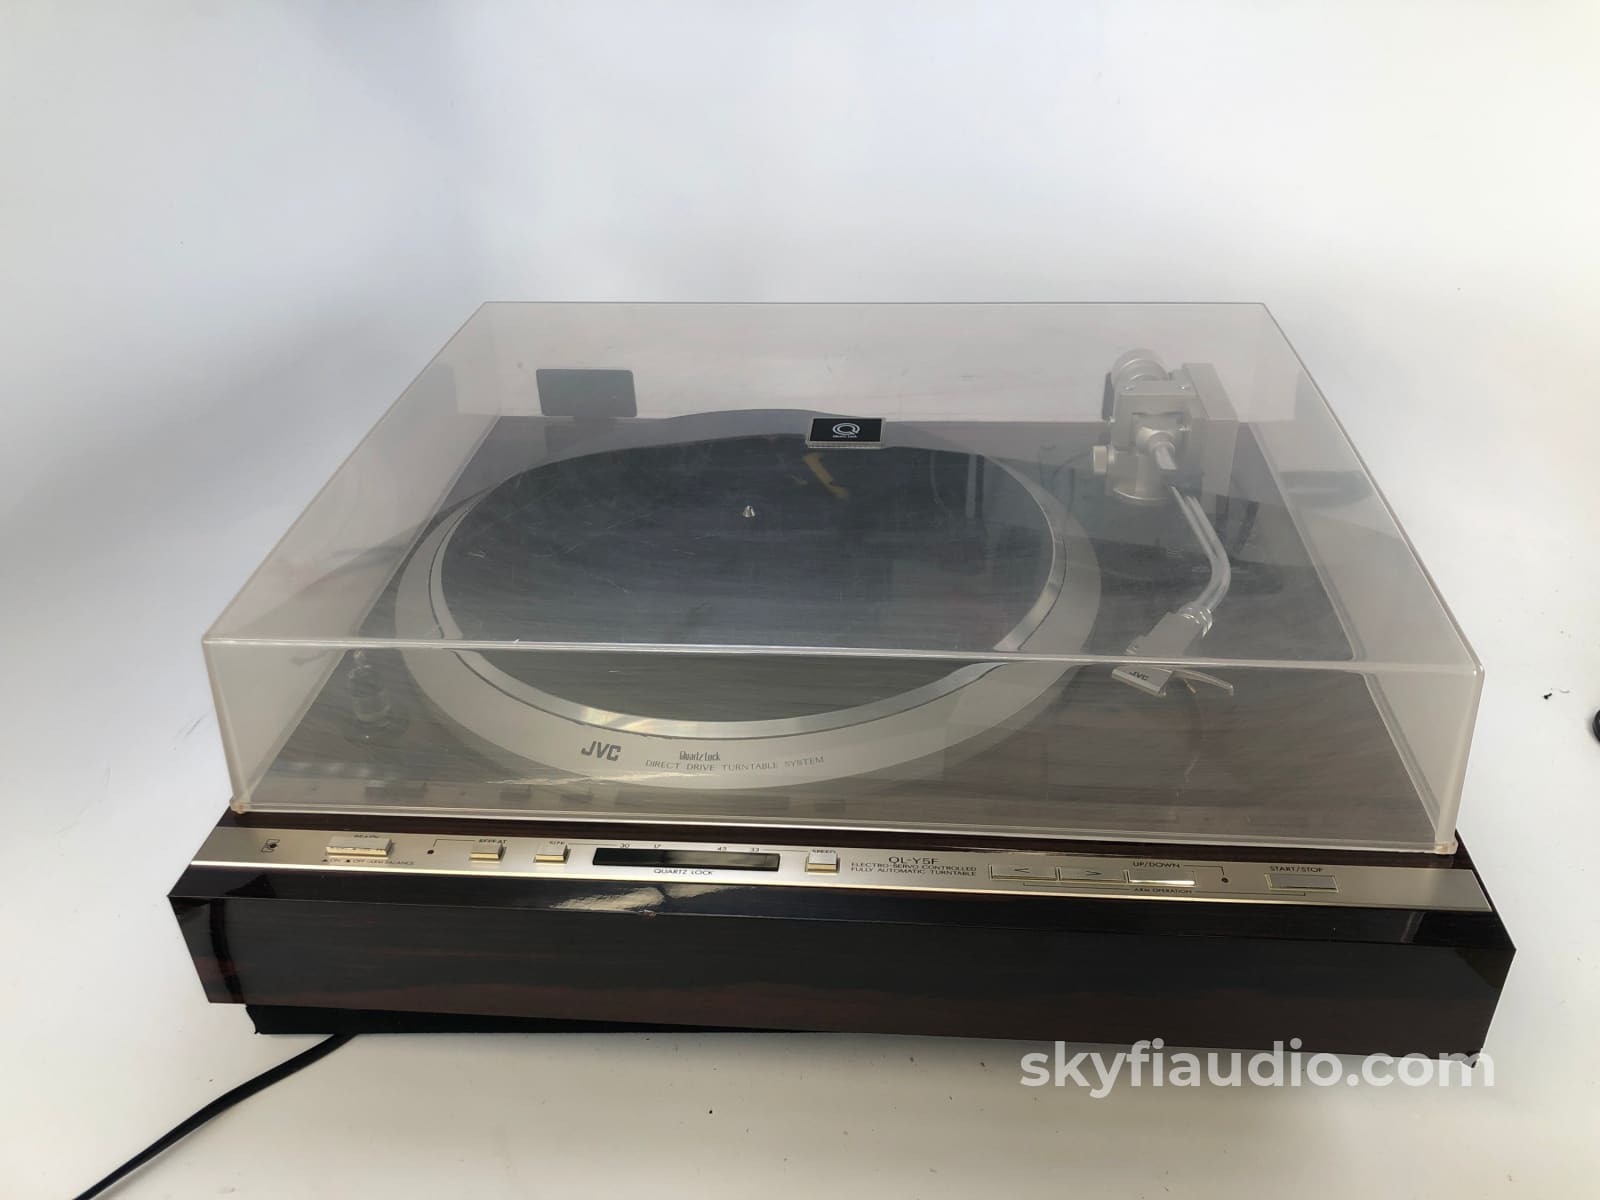 Jvc Ql-Y5F Automatic Vintage Turntable - Upgraded To Sumiko Bluepoint